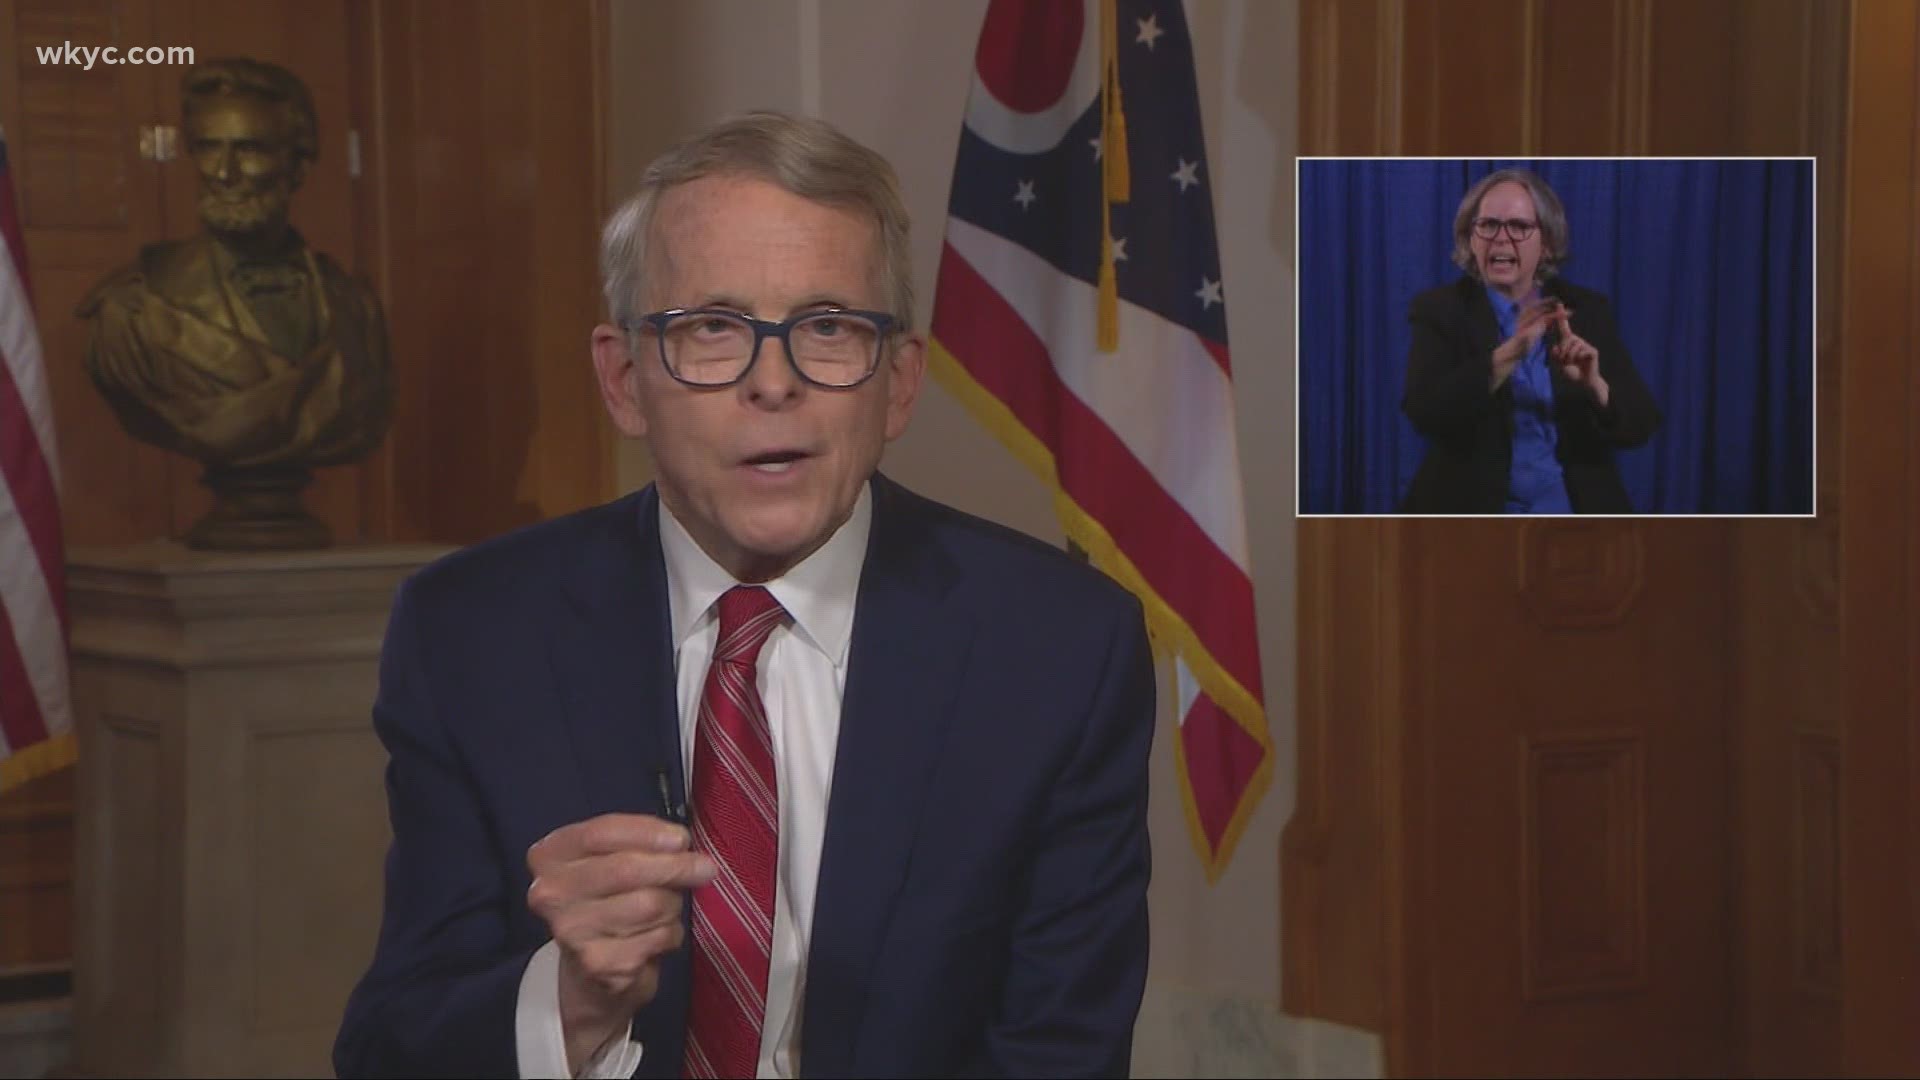 DeWine added that the state will be holding a lottery offering a million dollars for adults who have received at least one dose of the vaccine.